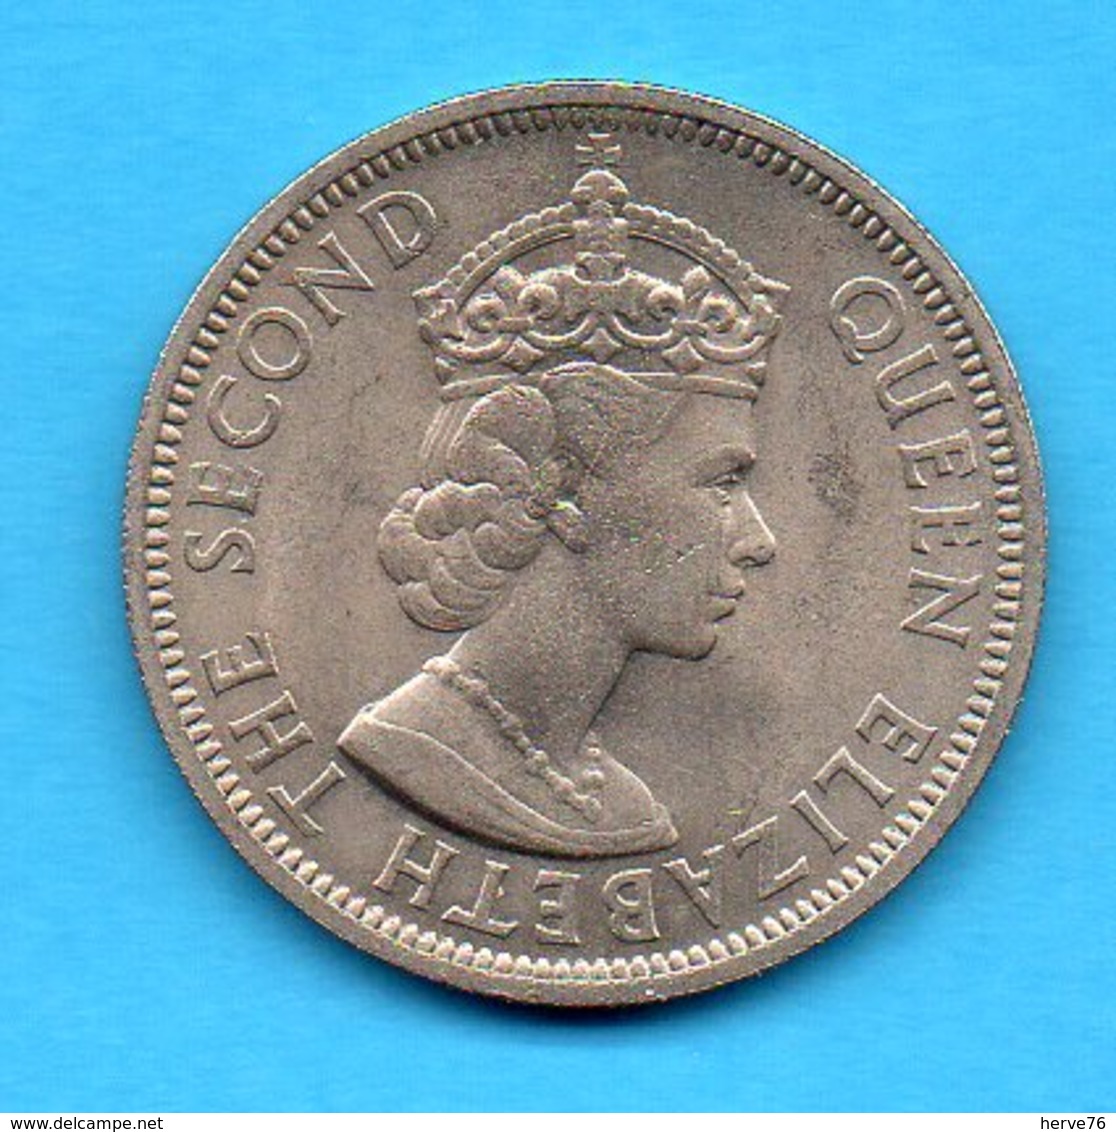 MALAYA AND BRITISH BORNEO - Pièce 50 CENTS - 1961 -  Queen Elisabeth The Second - Malaysie